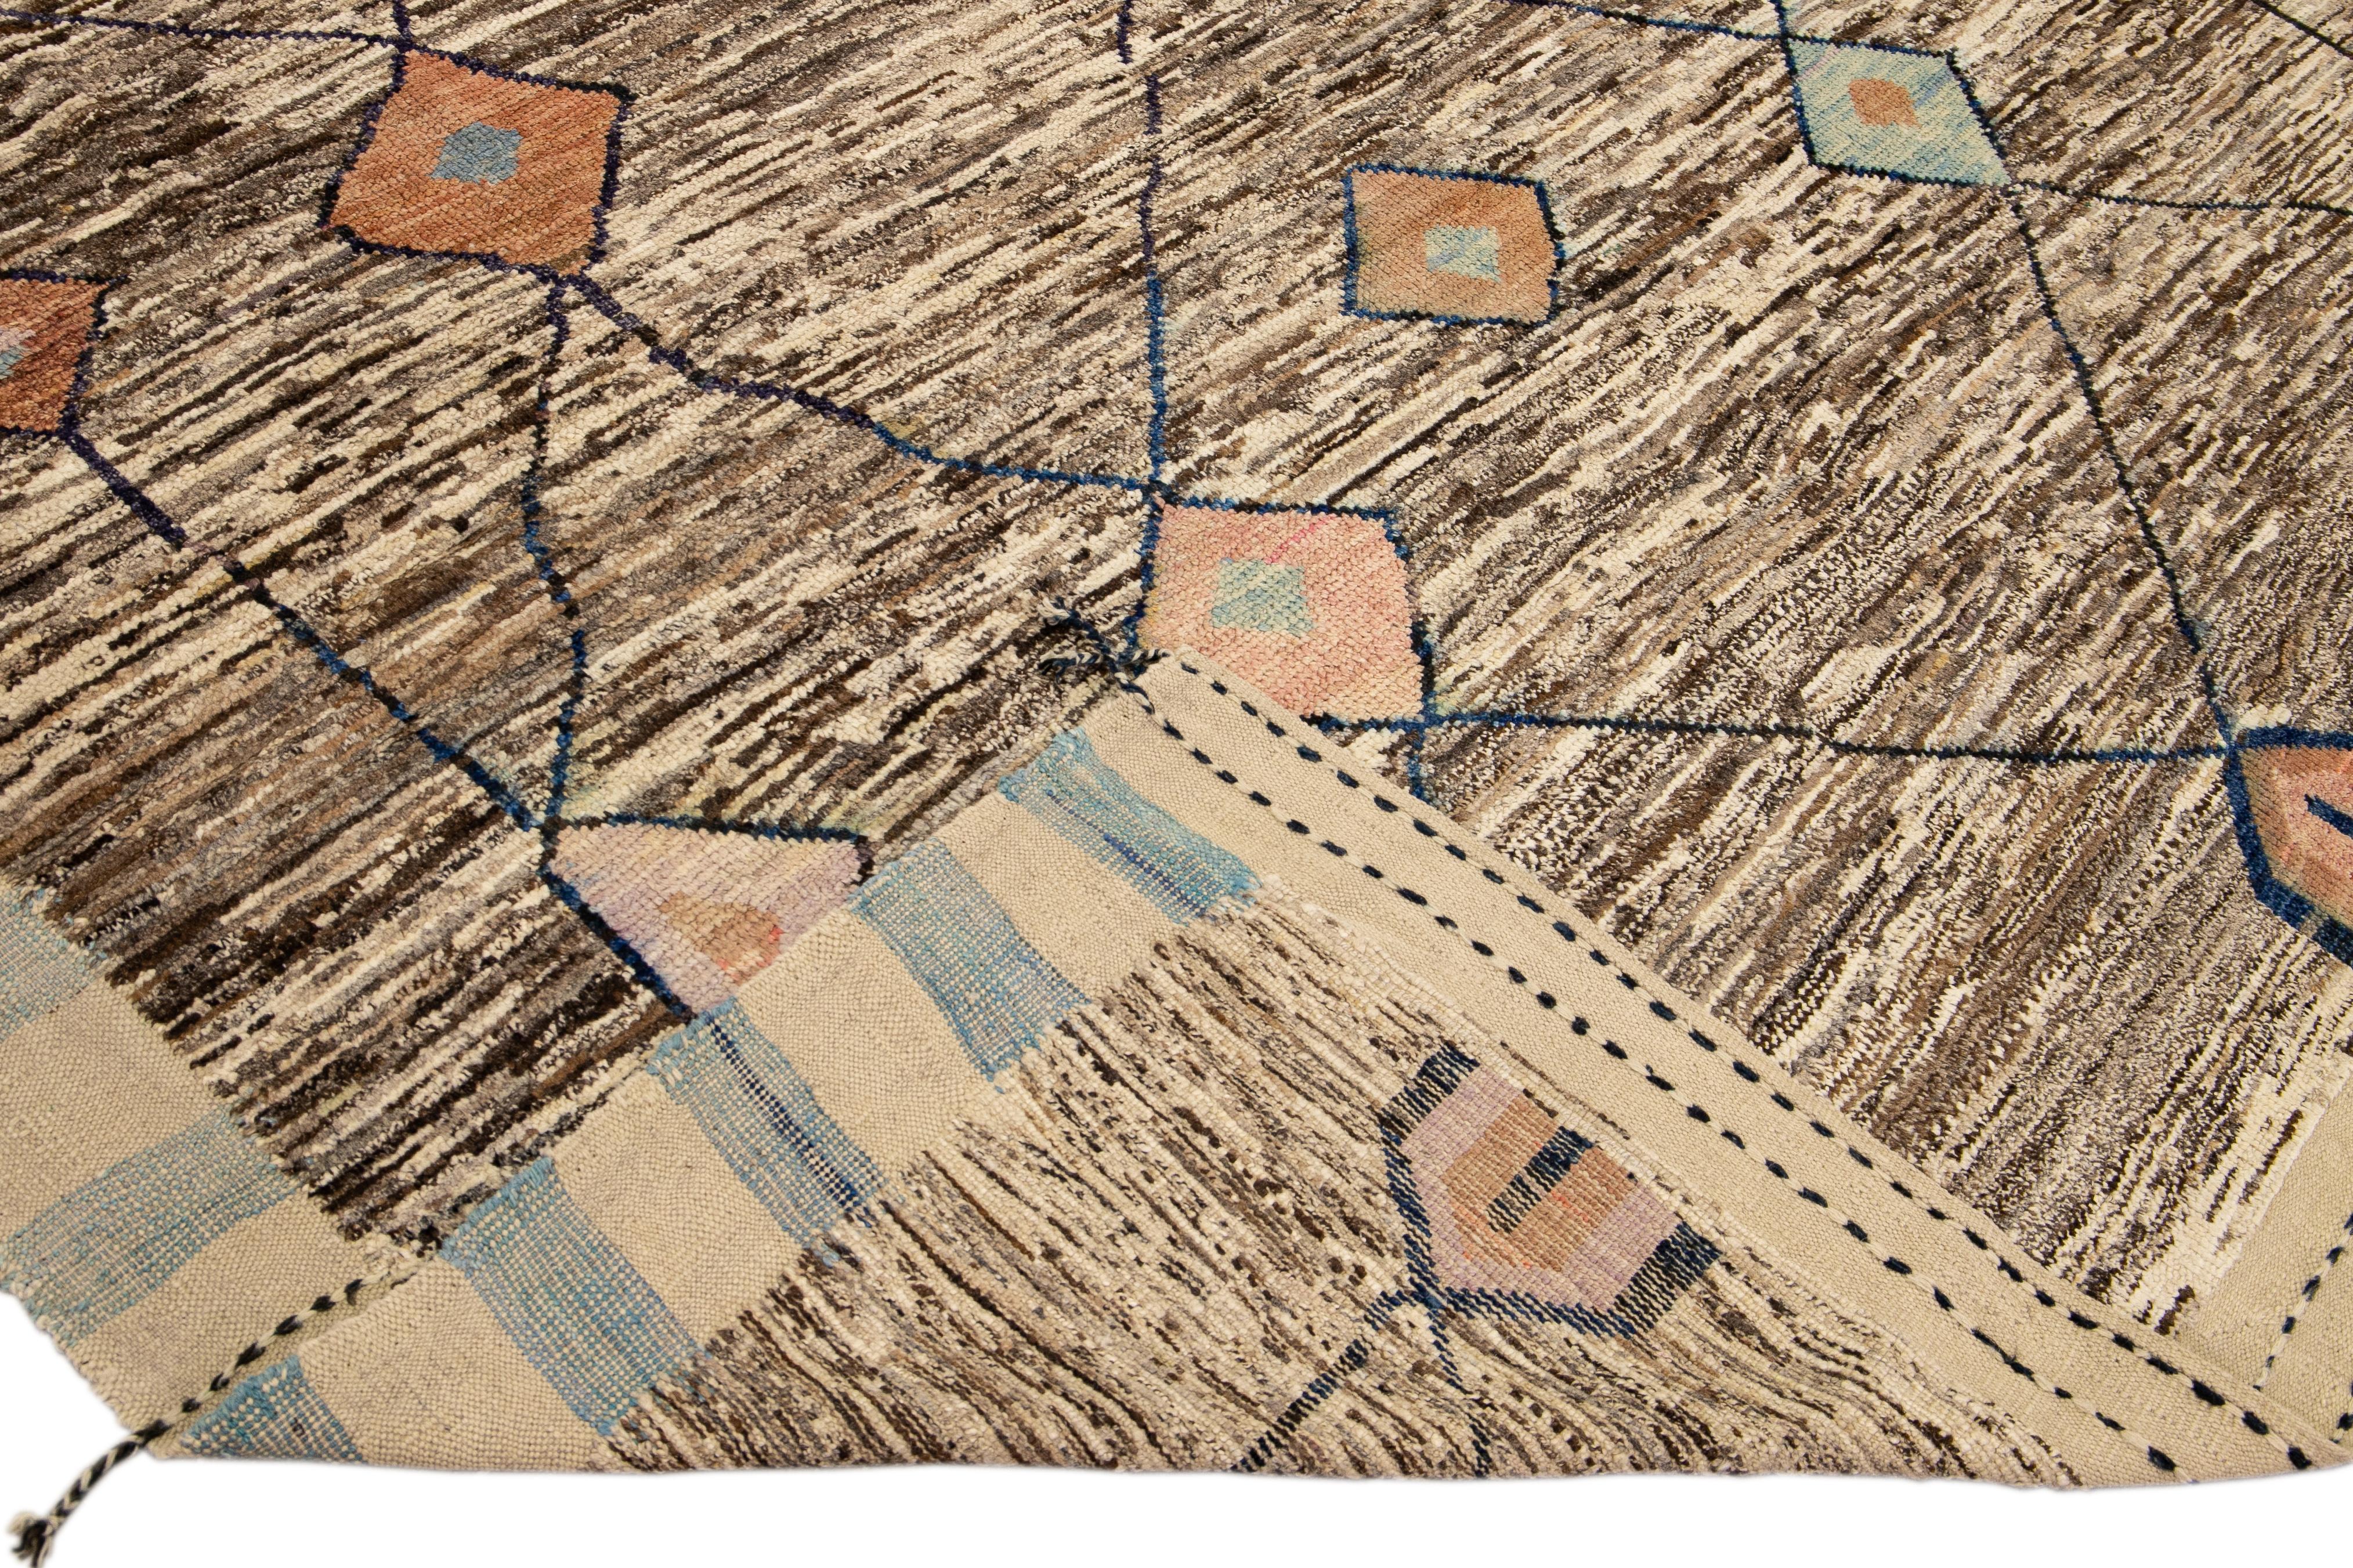 Beautiful Moroccan style handmade wool rug with a beige and brown field. This Modern rug has orange, pink, and blue accents and beige-blue braid fringes featuring a gorgeous all-over tribal boho design.

This rug measures: 8'10